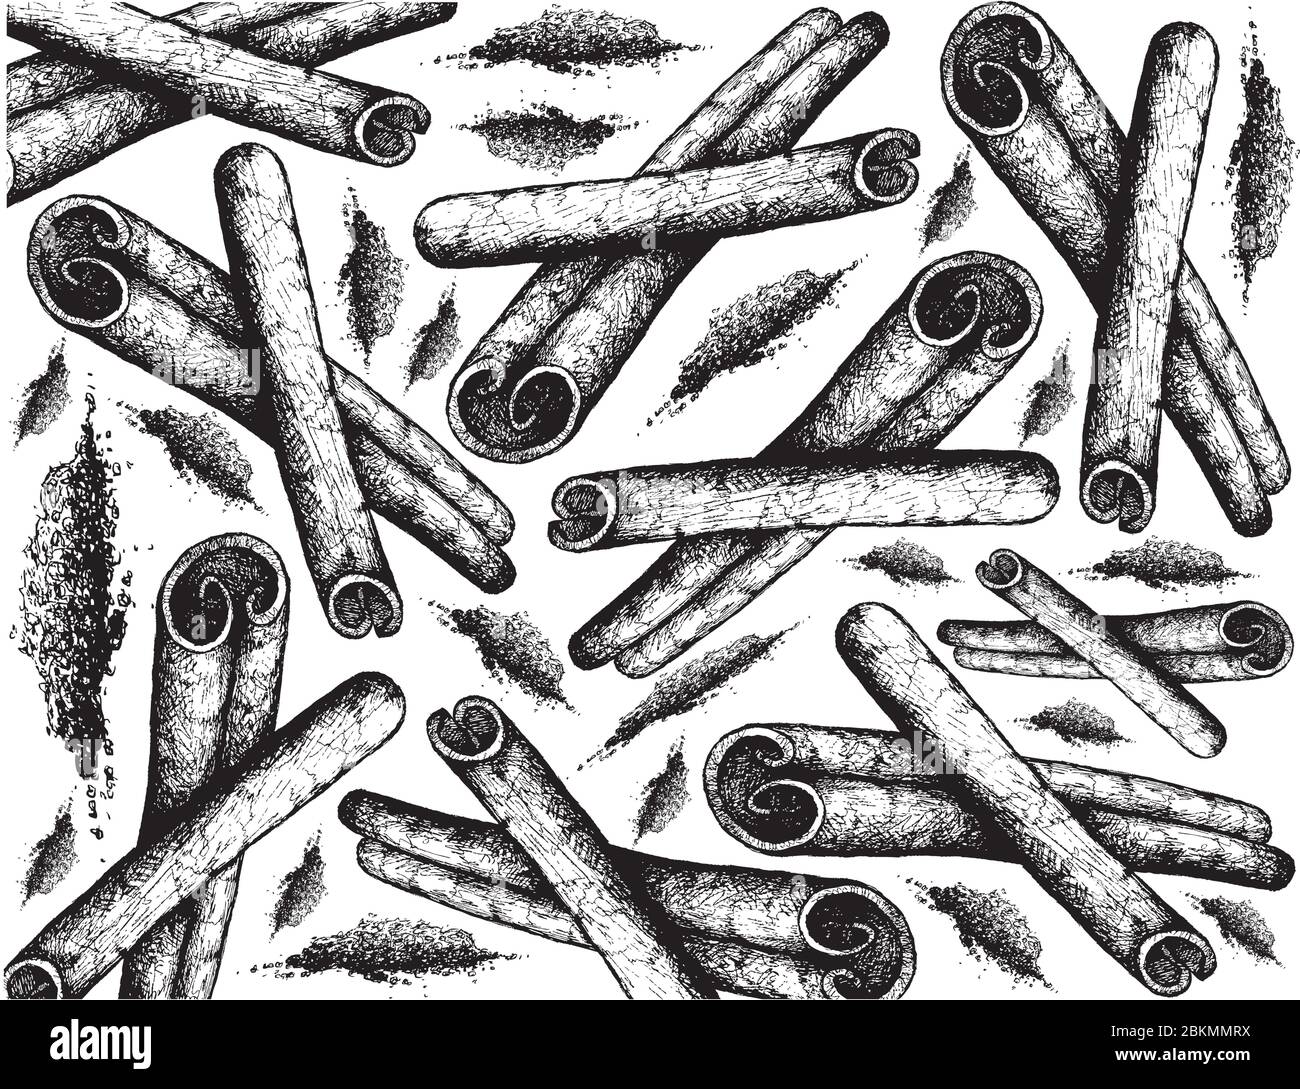 Herbal Plants, Hand Drawn Illustration Background of Dried Cinnamon Sticks Used for Seasoning in Cooking. Stock Vector